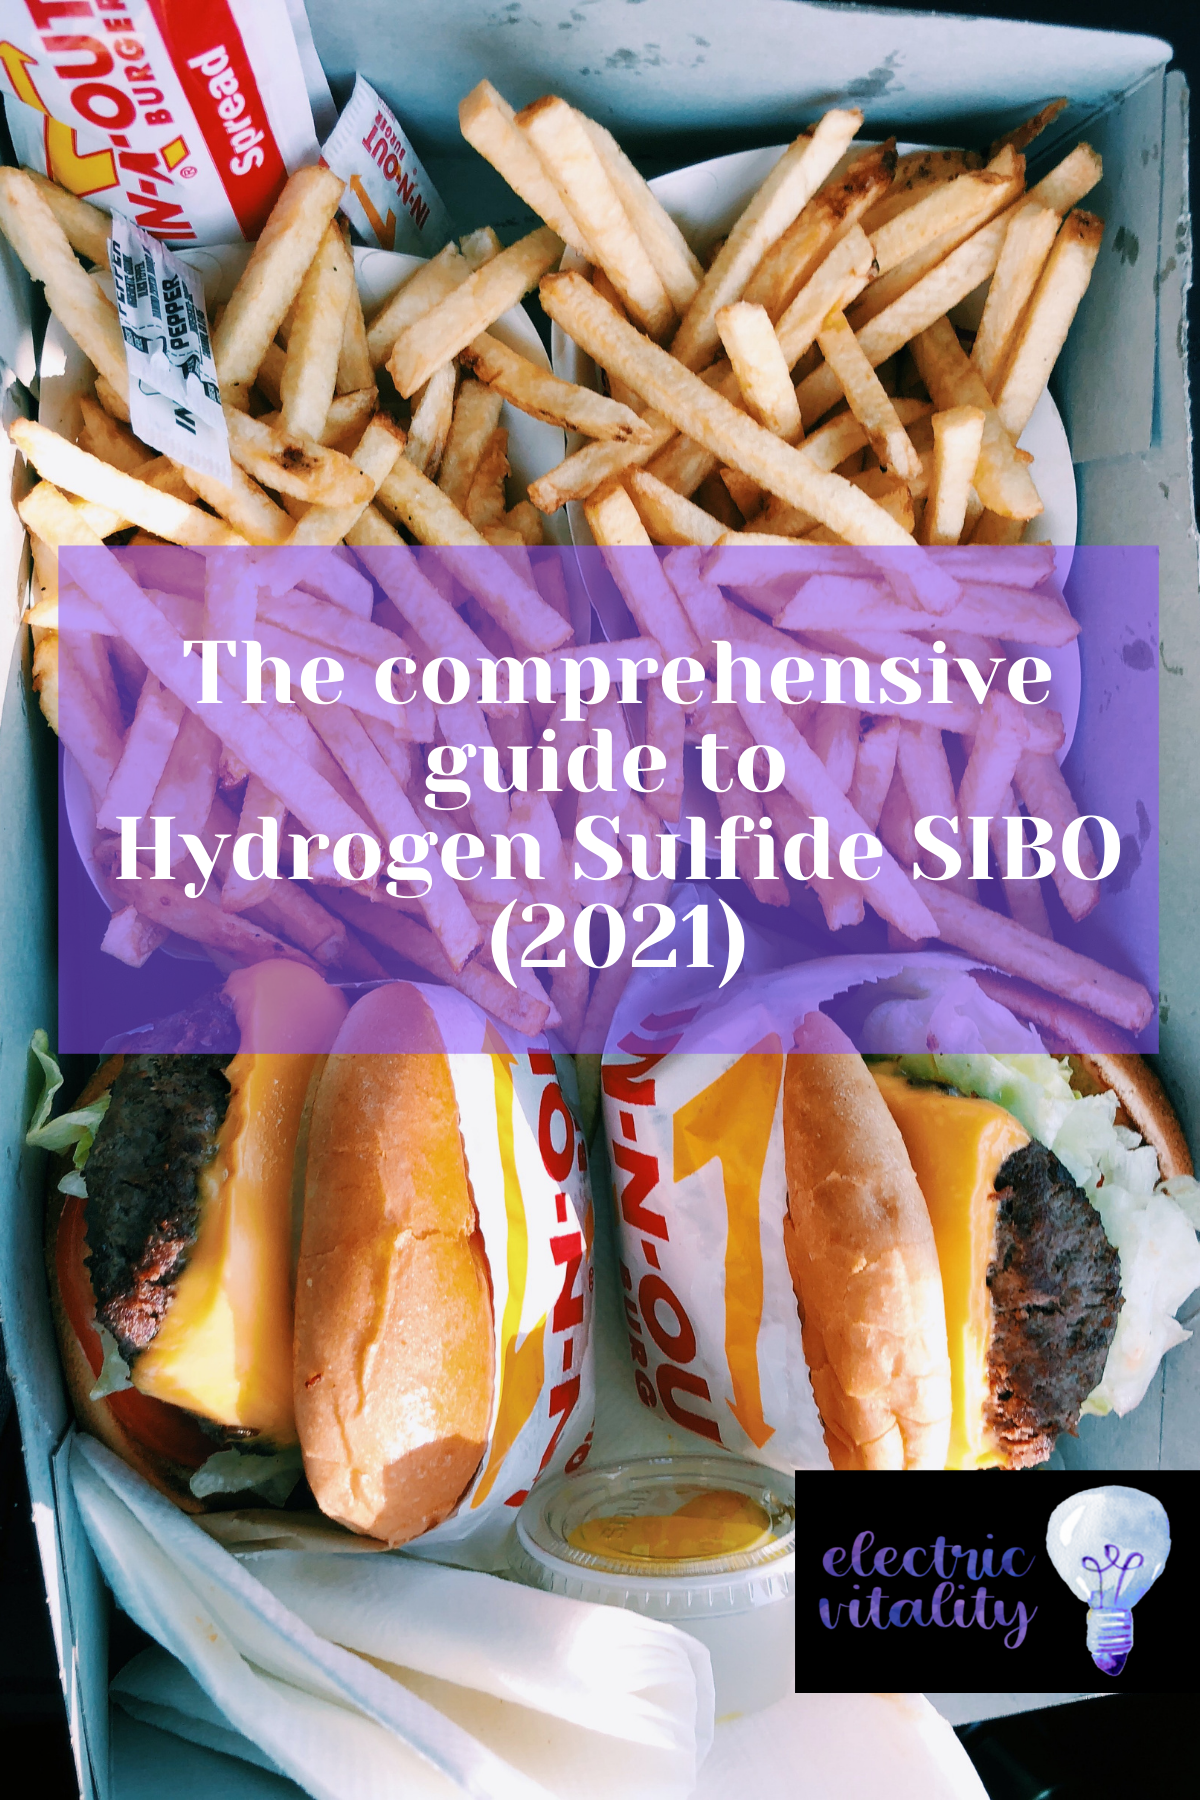 Burger and fries with text overlay: The Comprehensive Guide to Hydrogen Sulfide SIBO (2021)